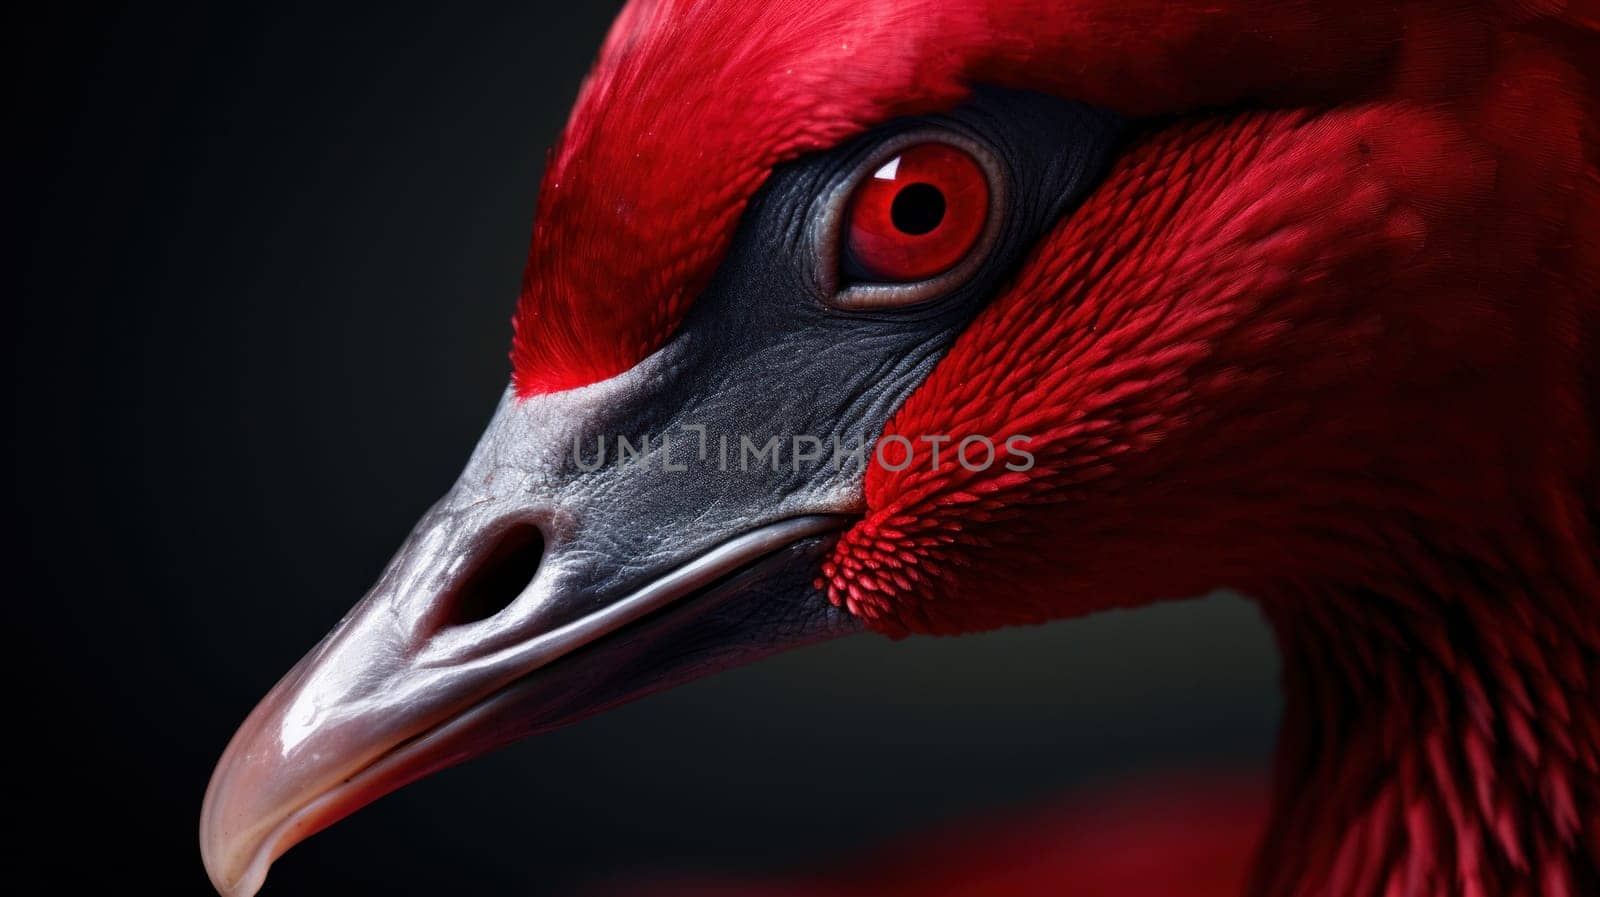 A close up of a red bird with bright eyes and black feathers